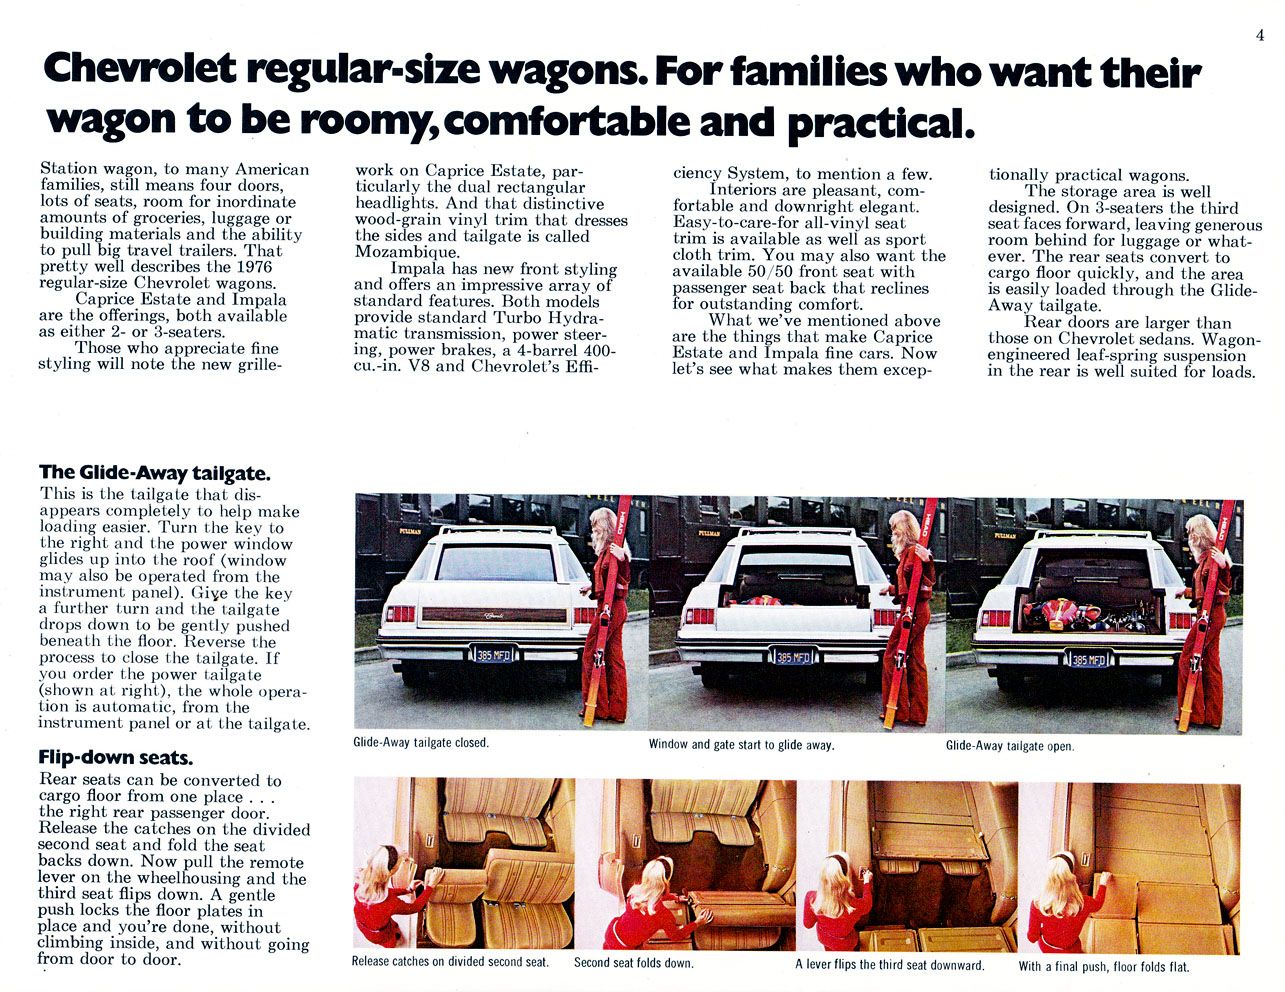 1976 Chevrolet Wagons Brochure Page 4